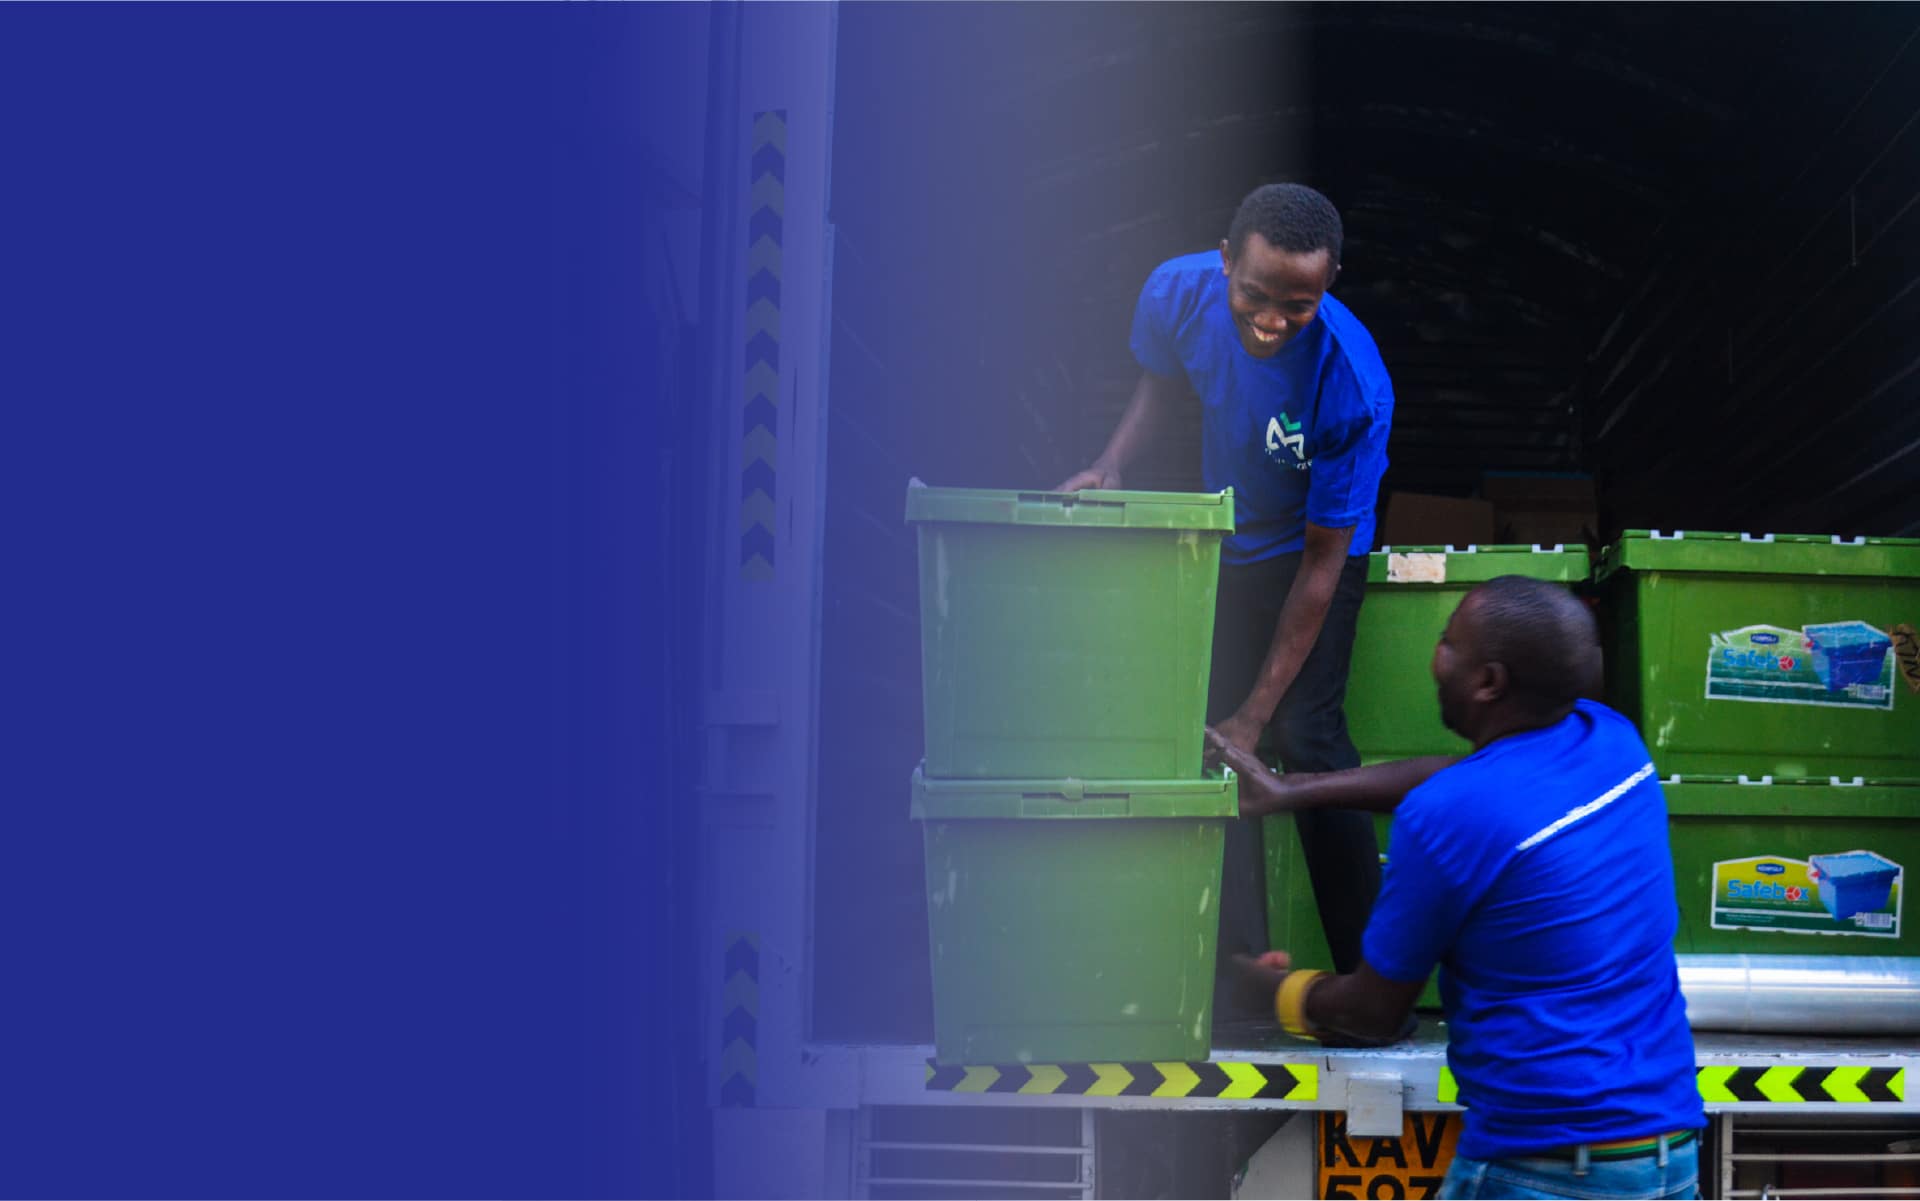 Best movers in nairobi, cheapest movers in nairobi,